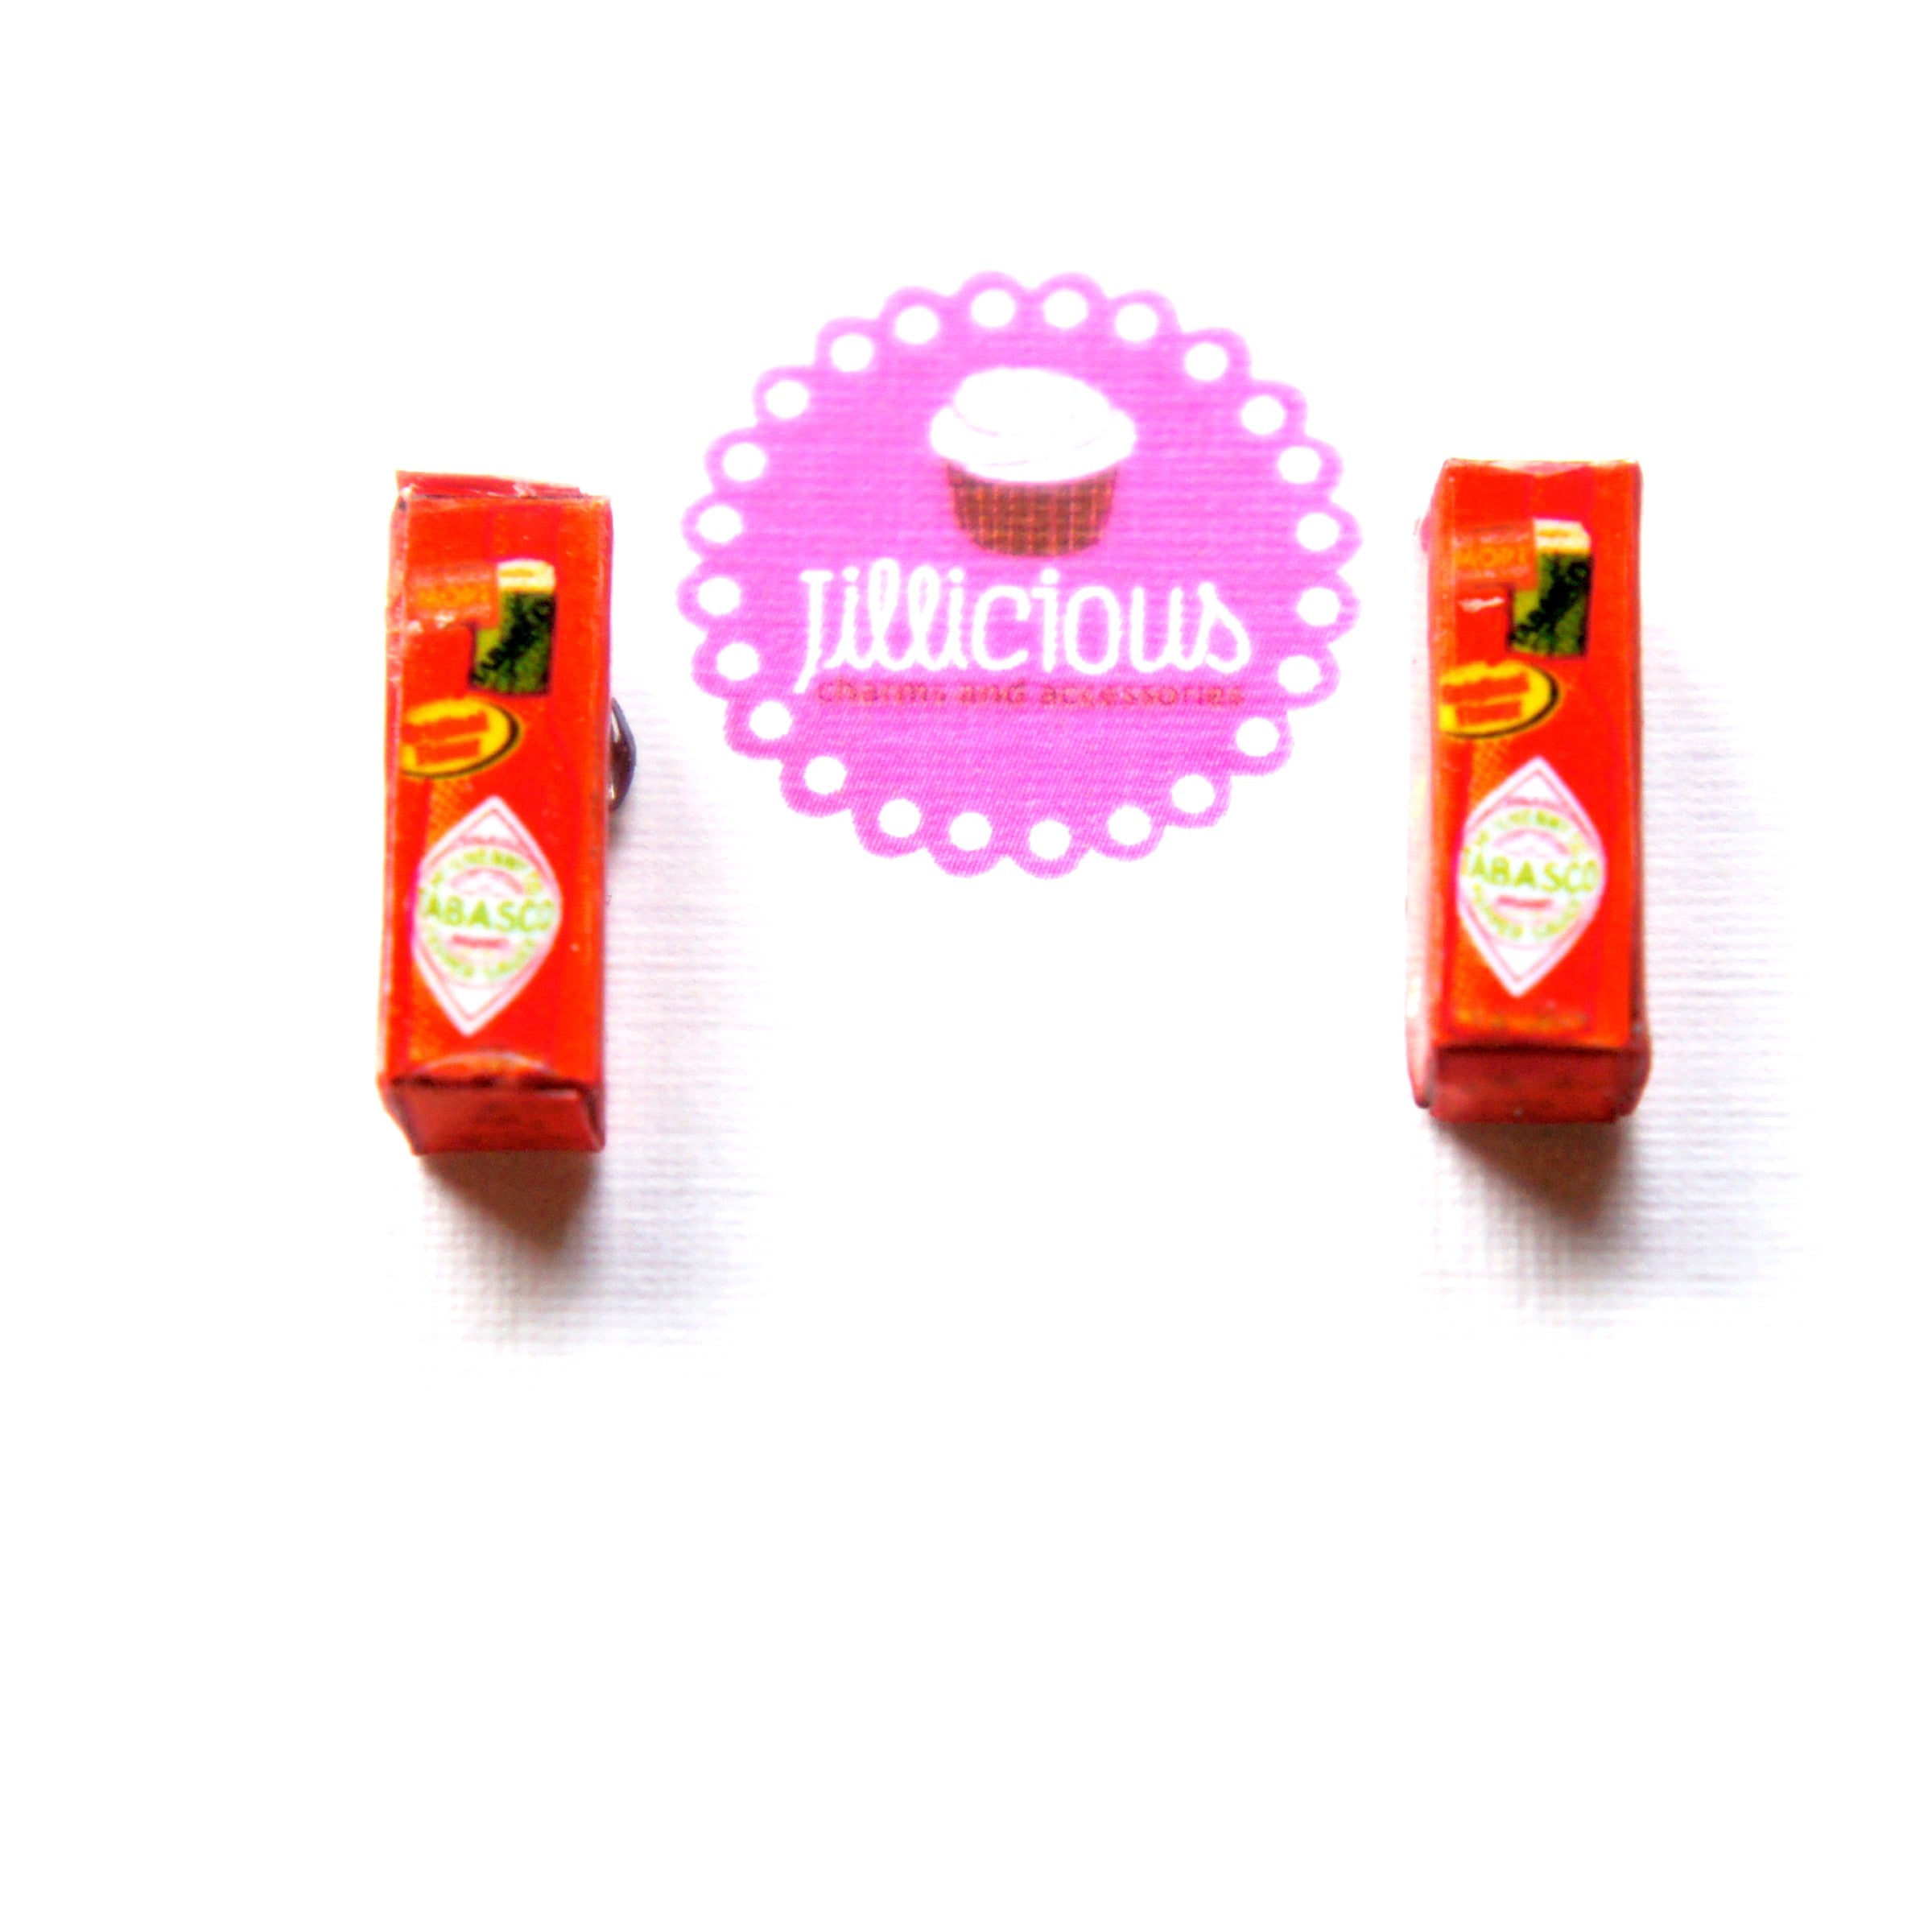 Hot Sauce Stud Earrings - Jillicious charms and accessories